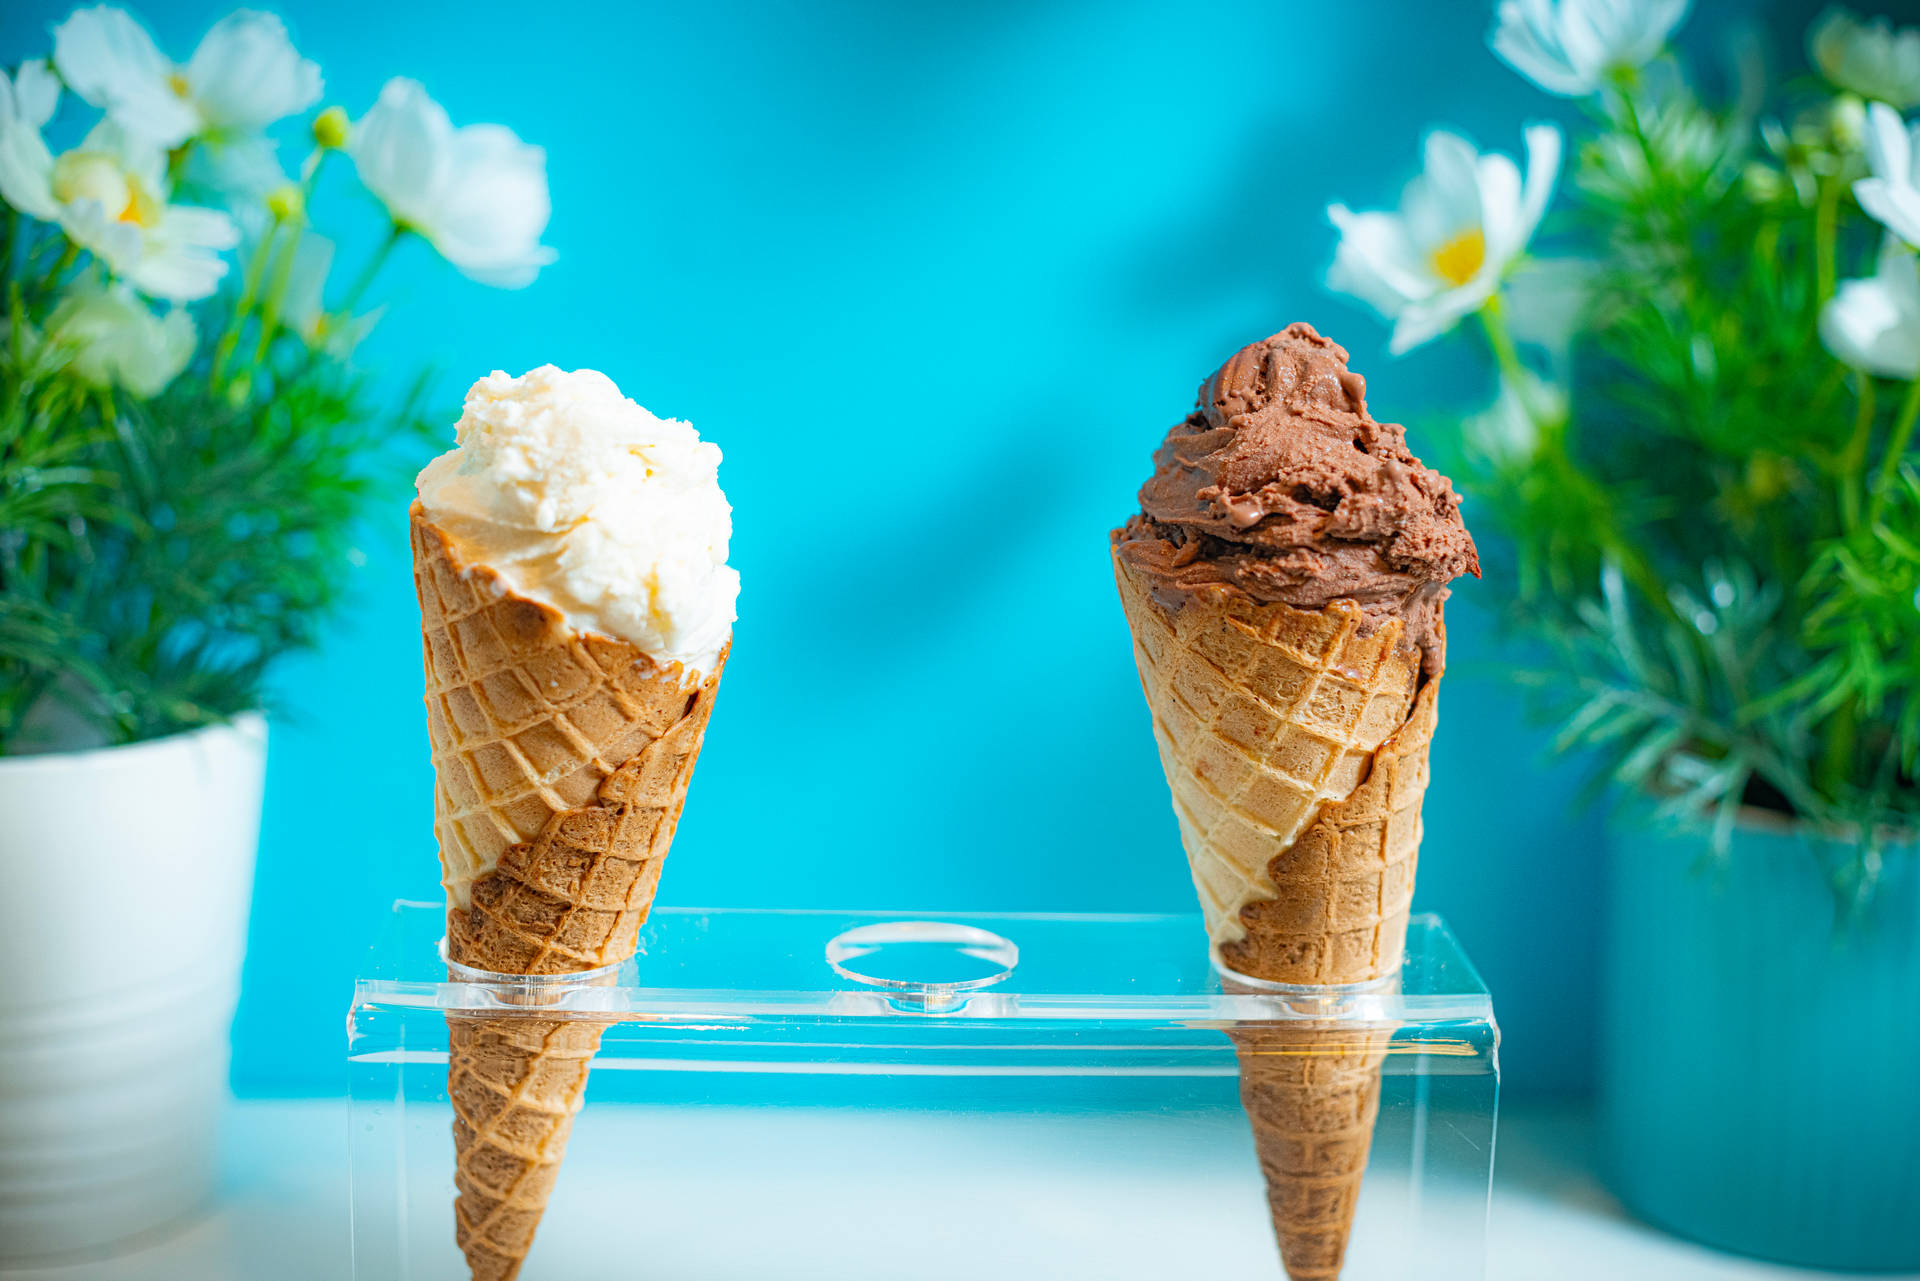 Ice Cream 7952X5304 Wallpaper and Background Image